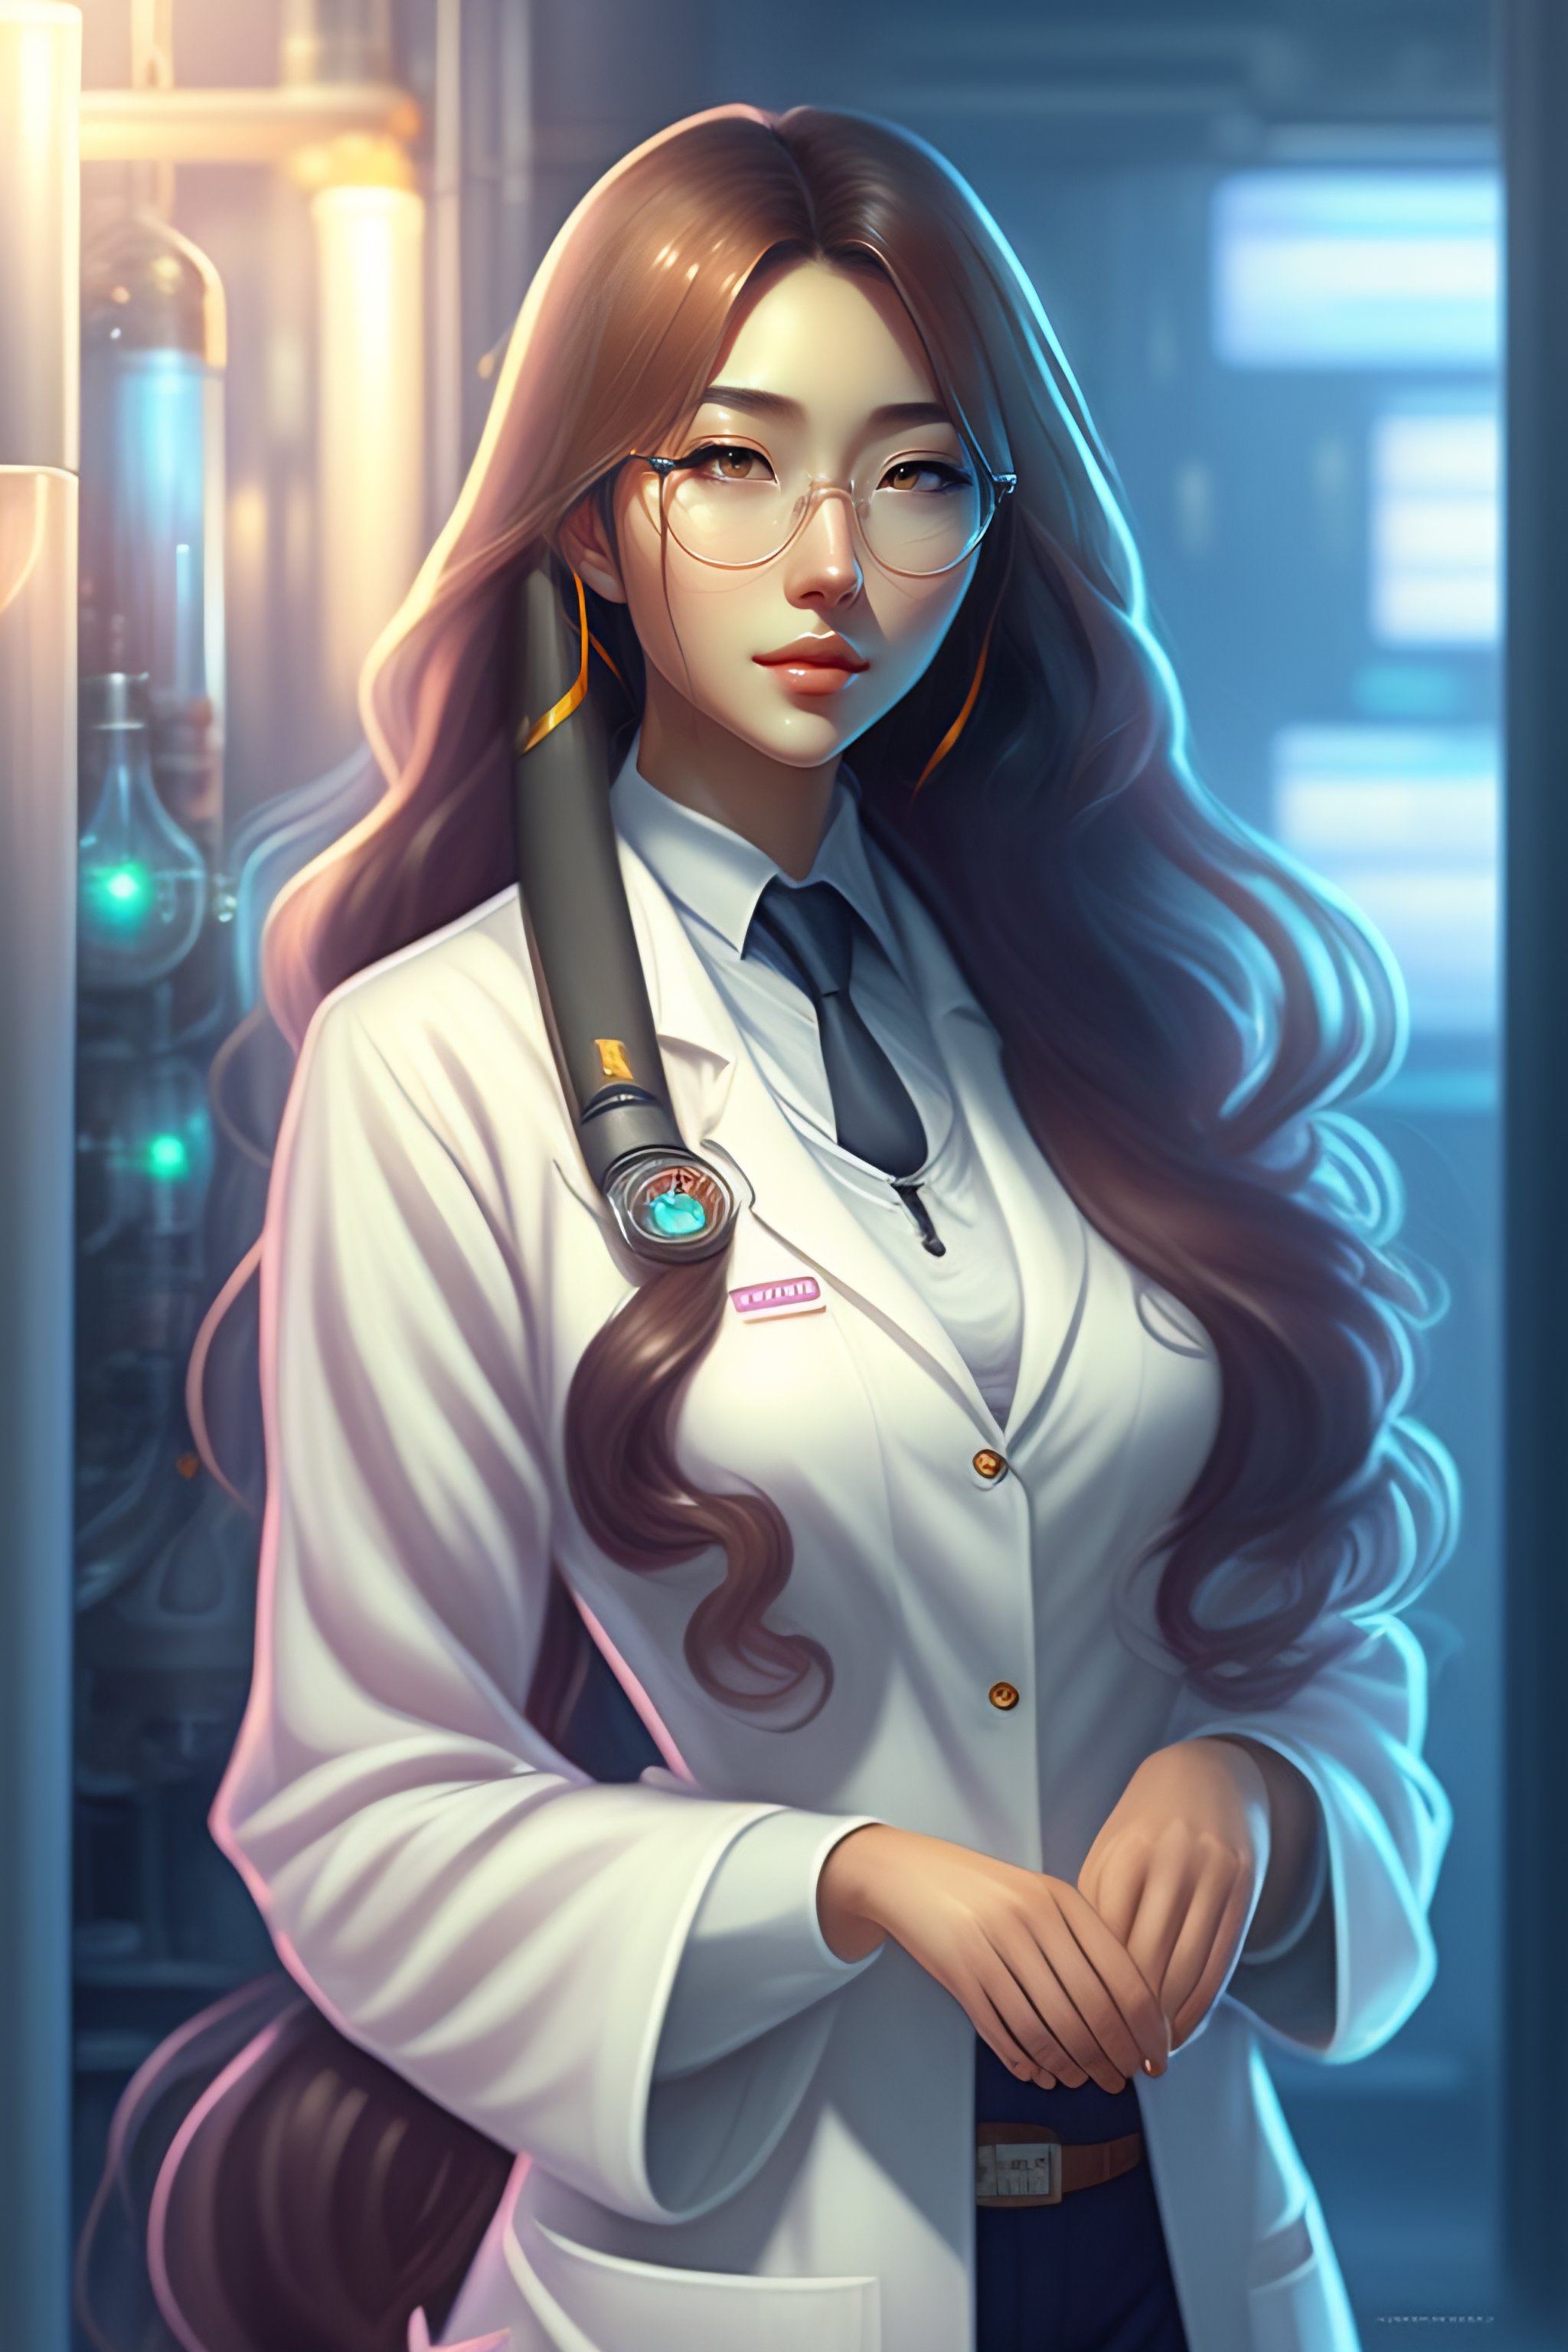 Lexica - Beautiful anime girl with long hair, wearing lab coat and ...